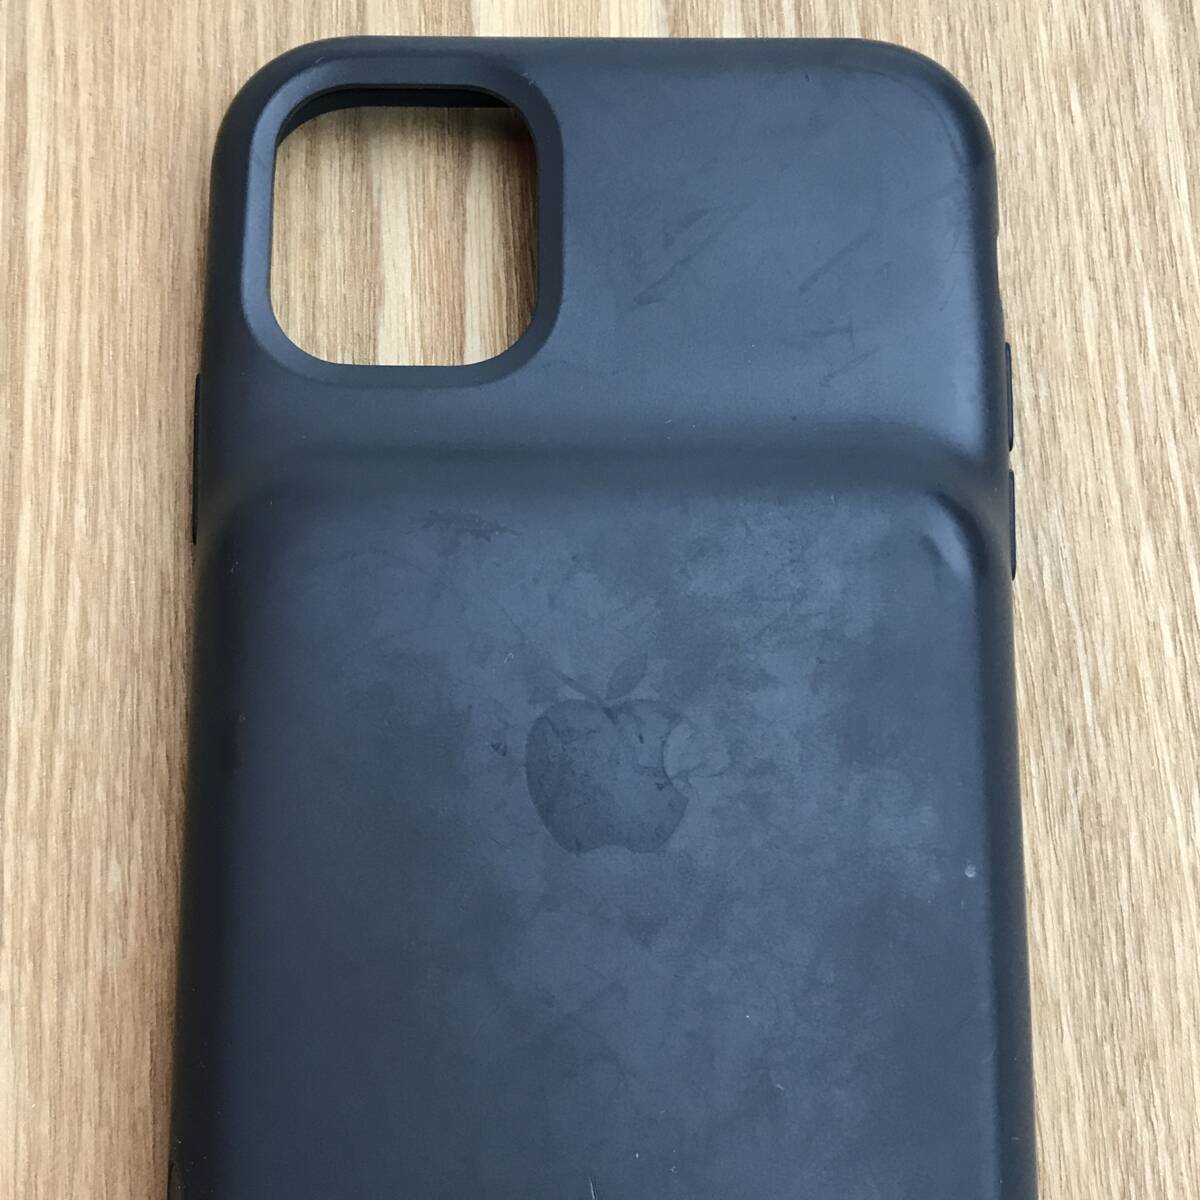 APPLE純正 iPhone 11 Smart Battery Case with Wireless Charging スマートバッテリーケース ワイヤレスチャージング ブラックの画像3